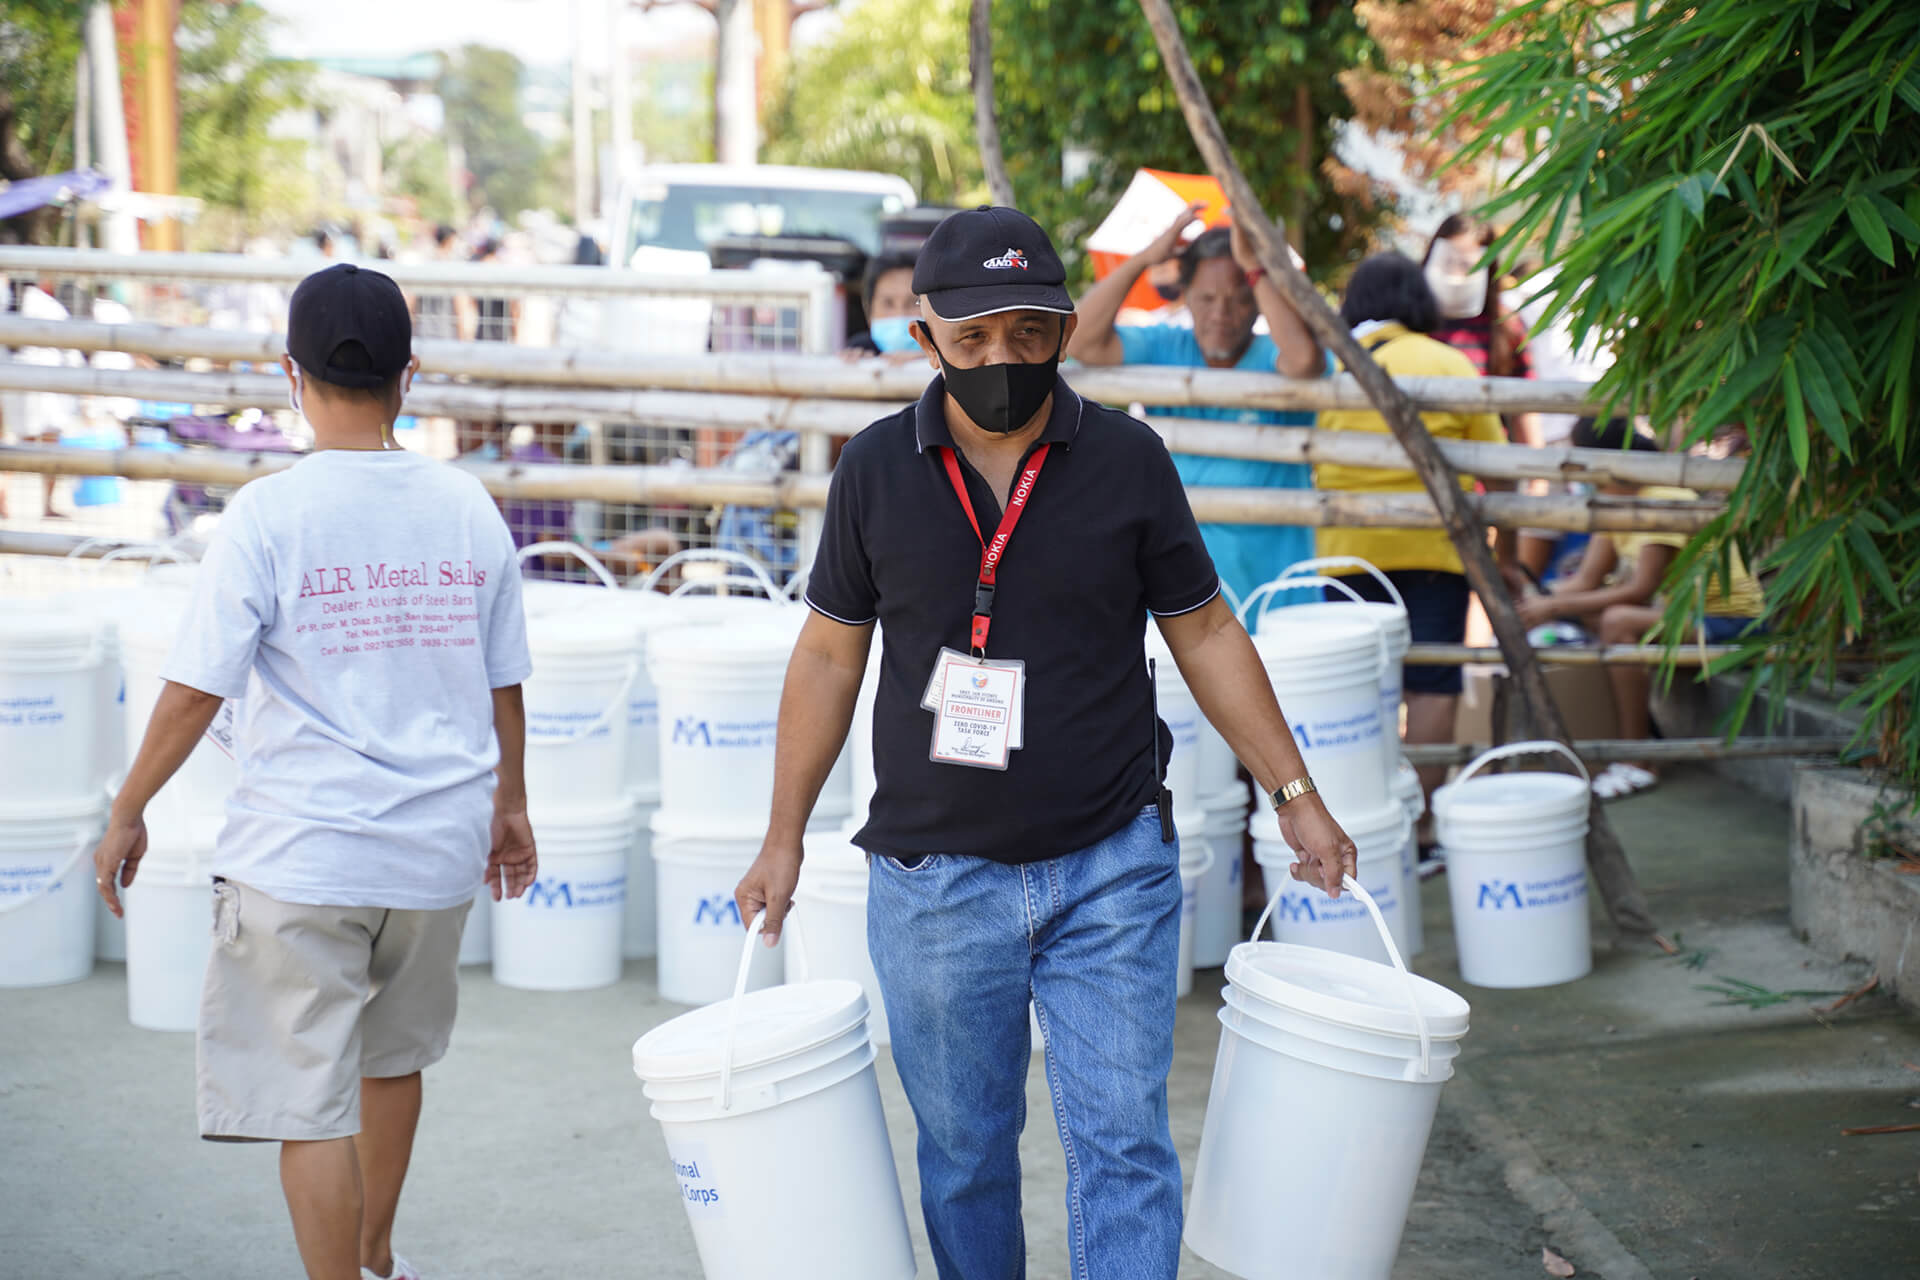 Our teams handed out hygiene kits to help prevent the spread of COVID-19 in the community of Angono in the Rizal province, in the Philippines.